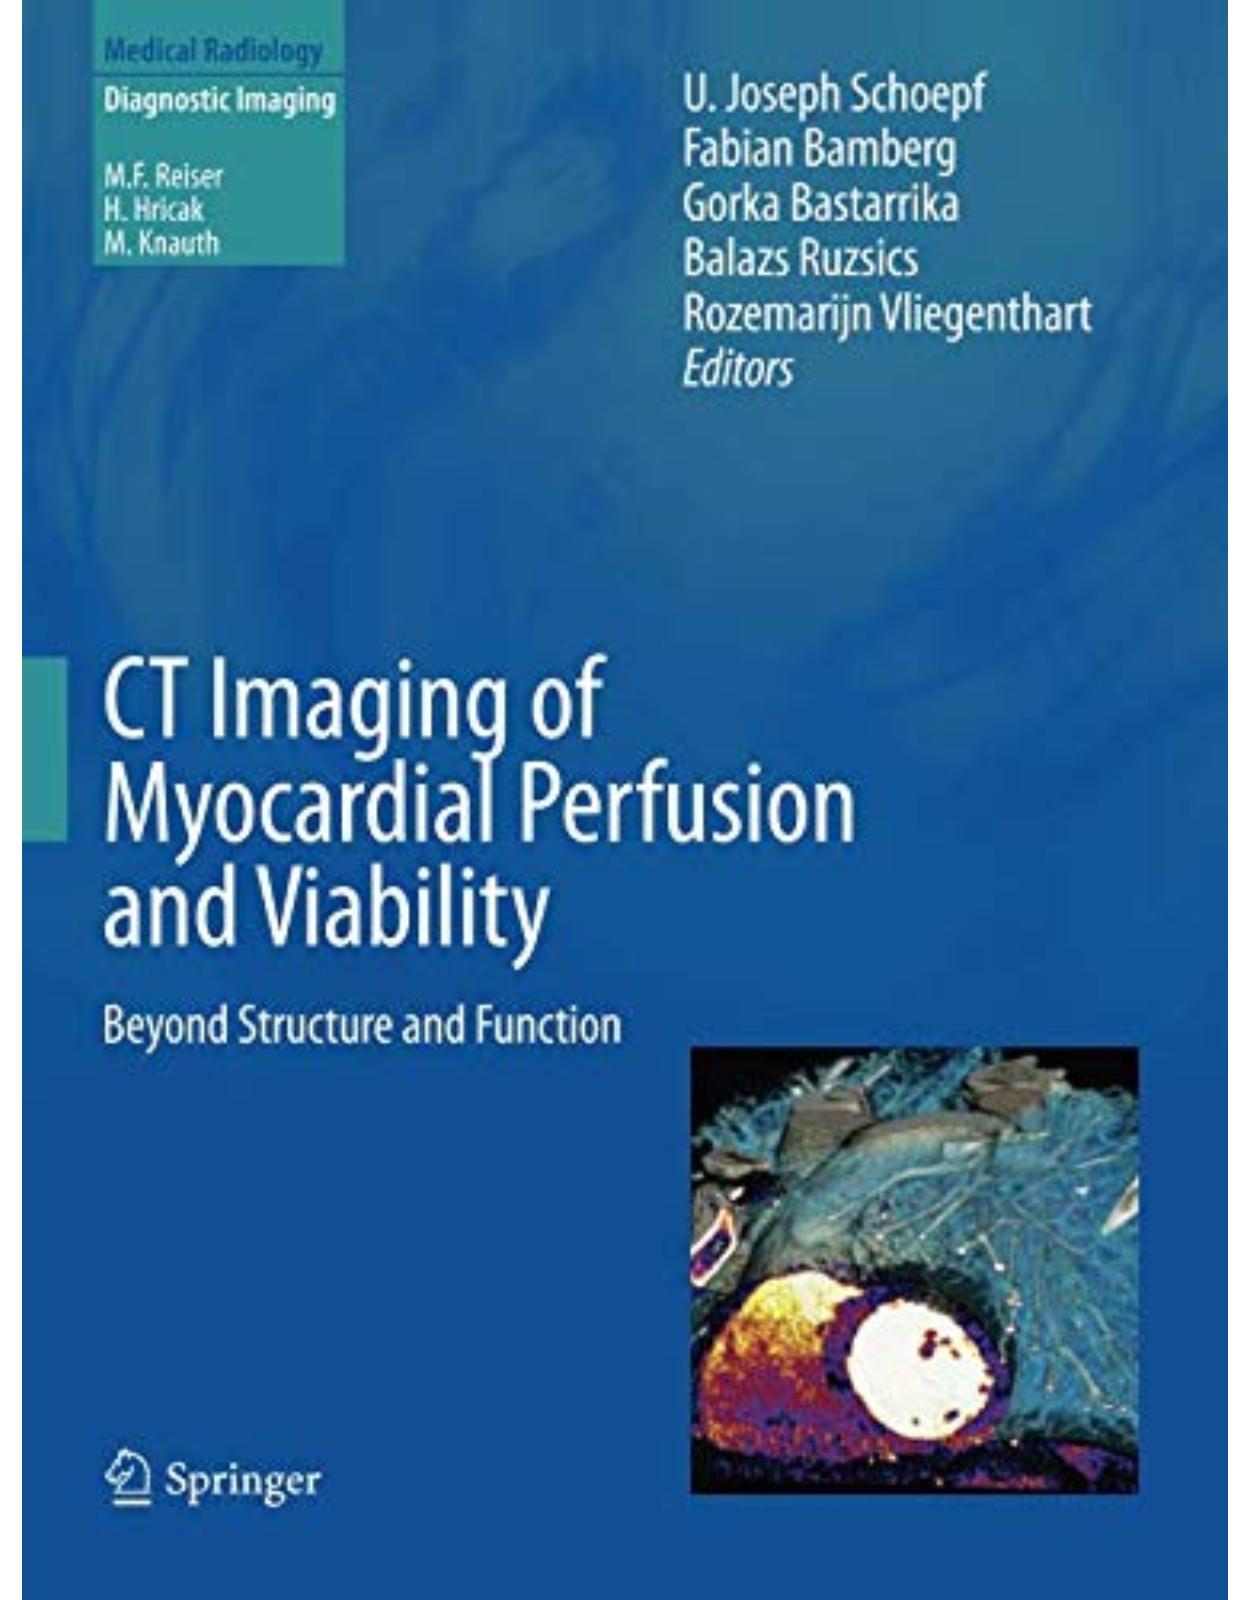 CT Imaging of Myocardial Perfusion and Viability: Beyond Structure and Function